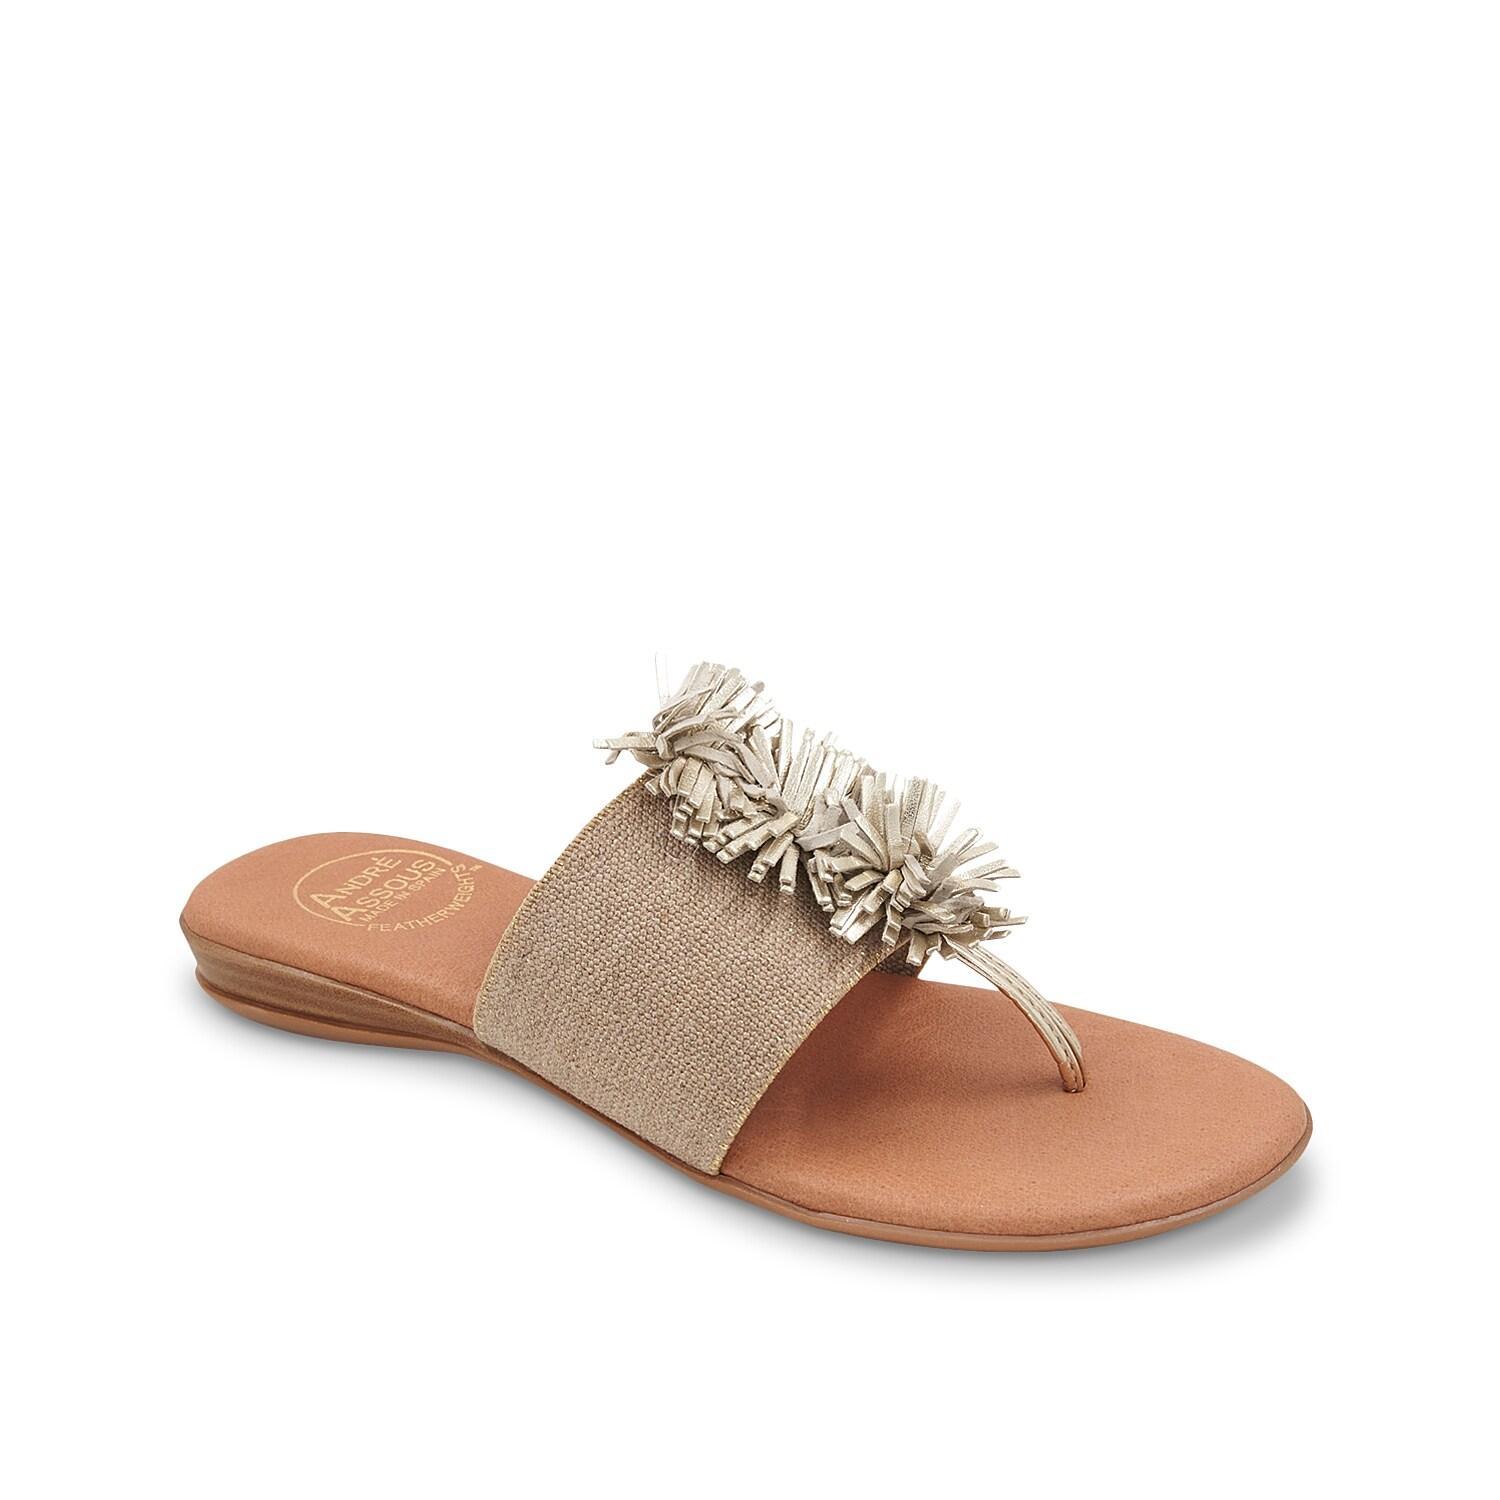 Andr Assous Novalee Featherweights Sandal Product Image